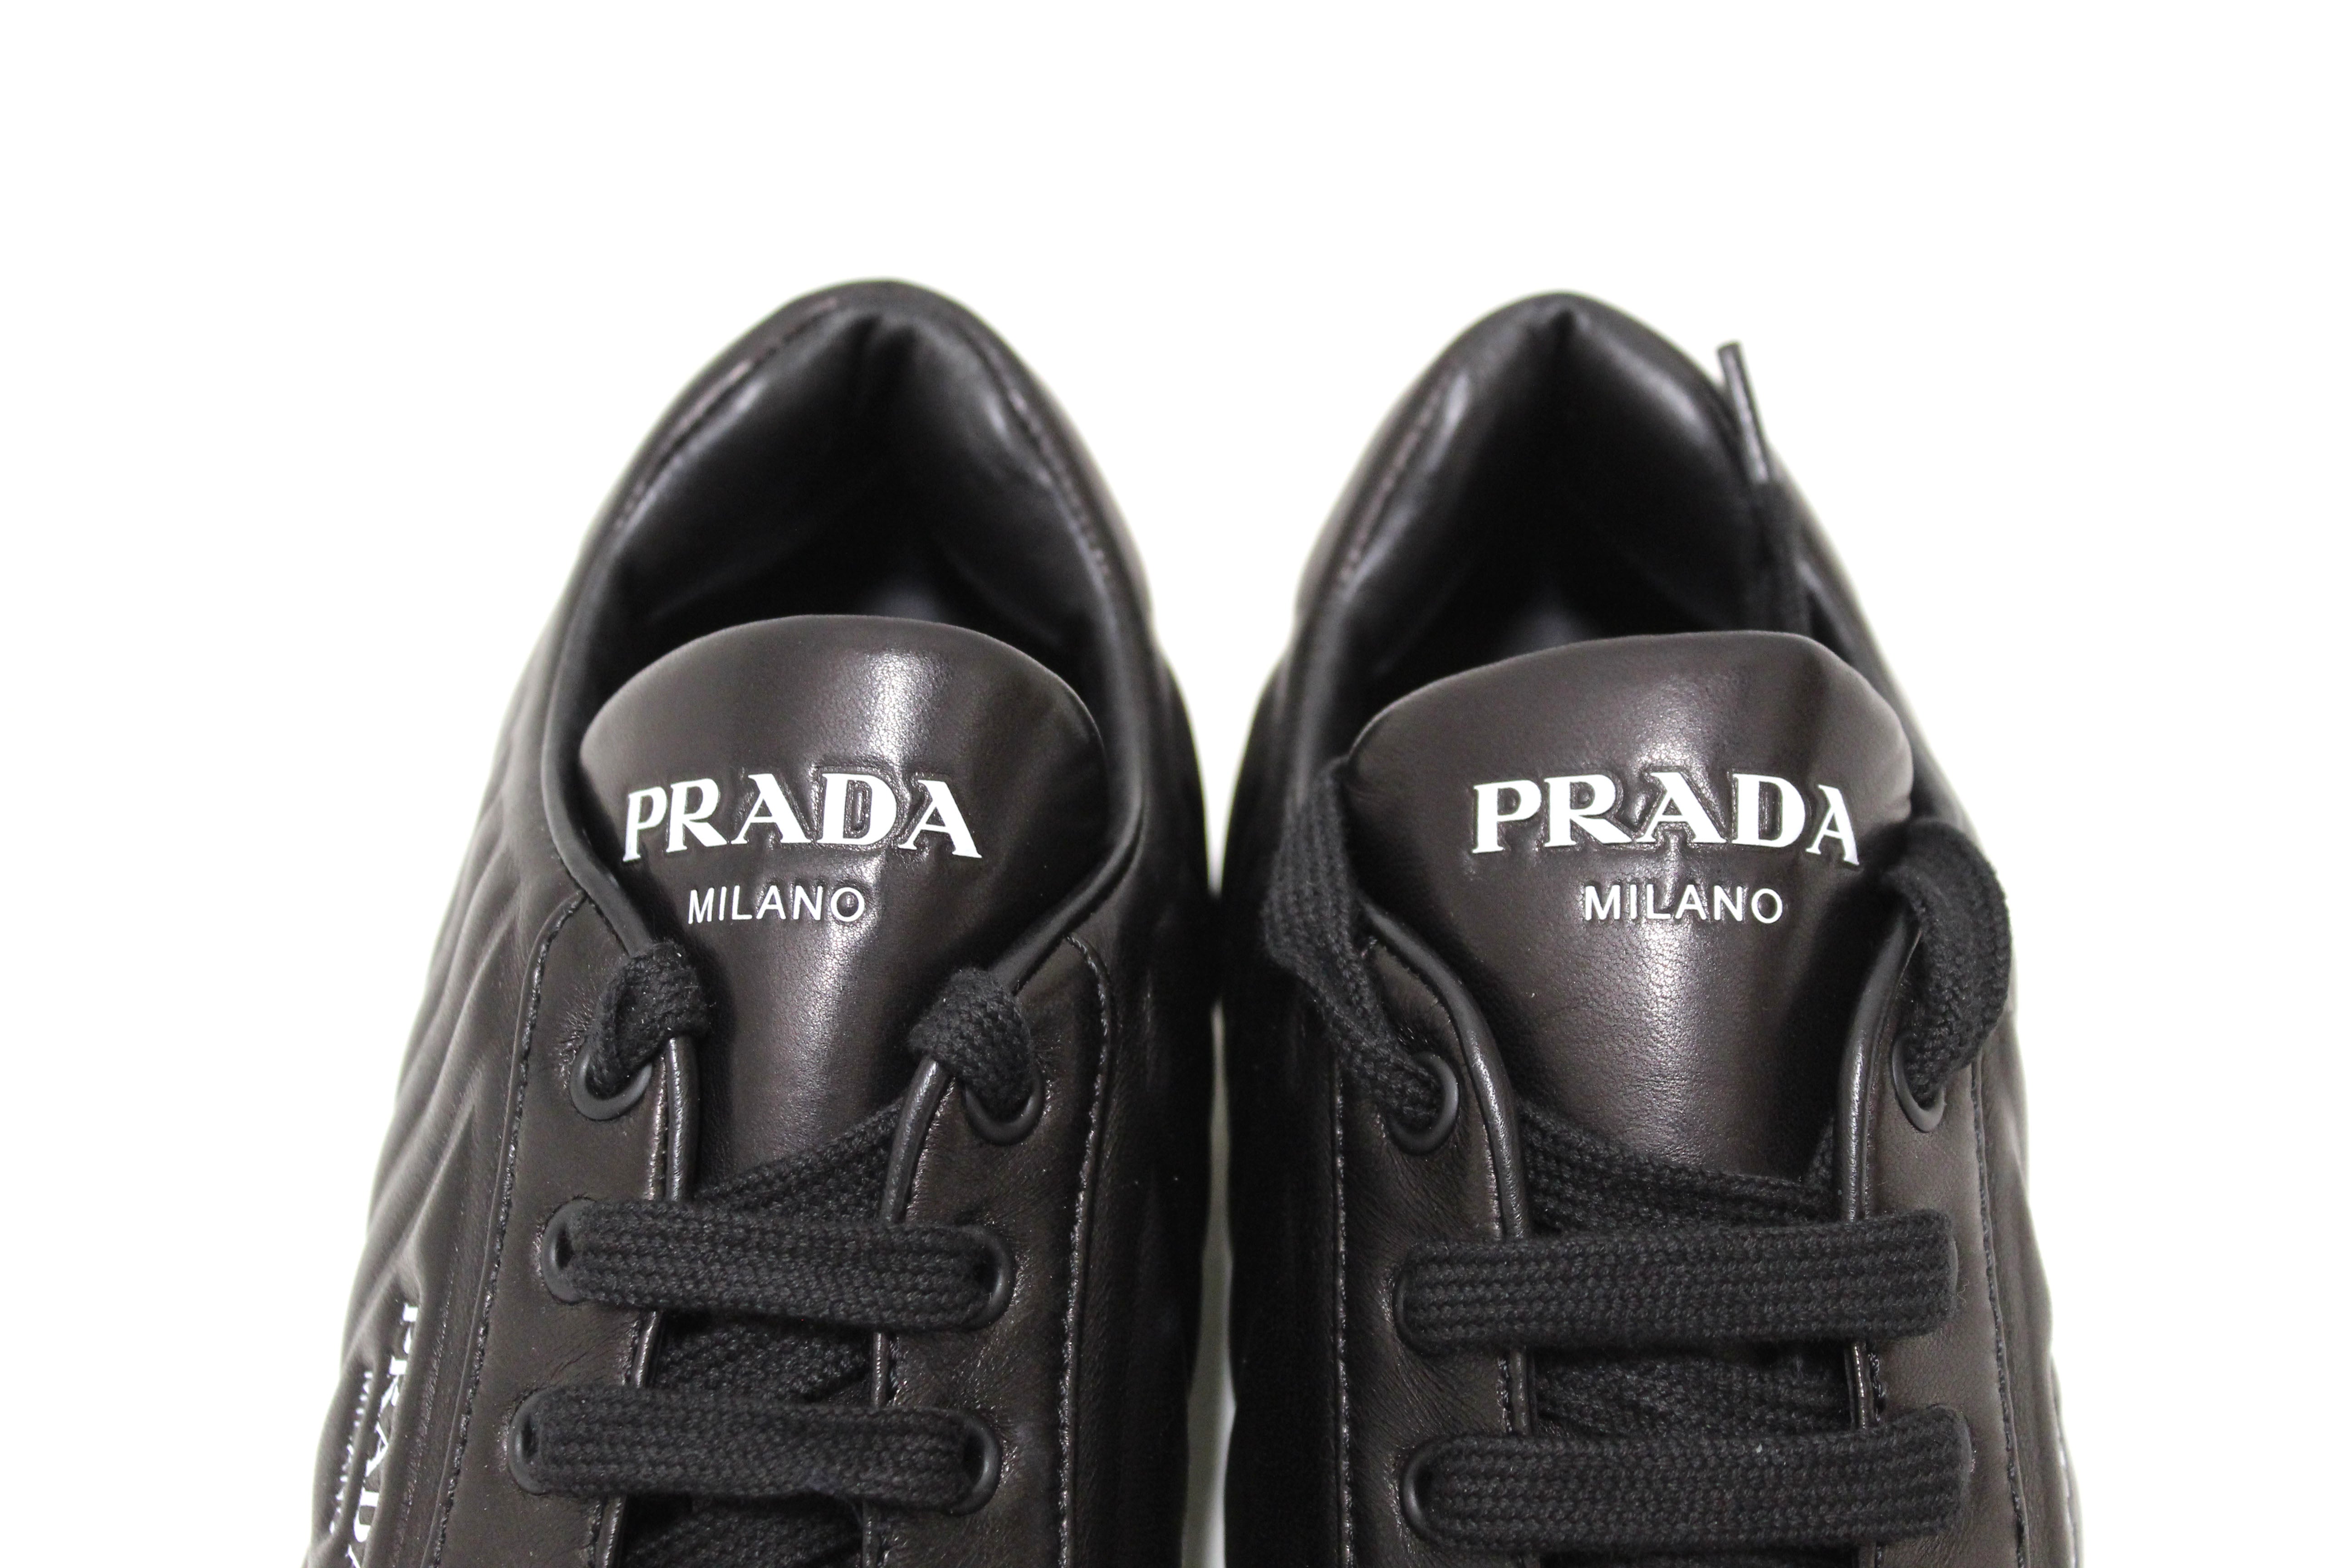 Authentic Prada Black Quilted Low Top Sneakers Shoes Size 40.5